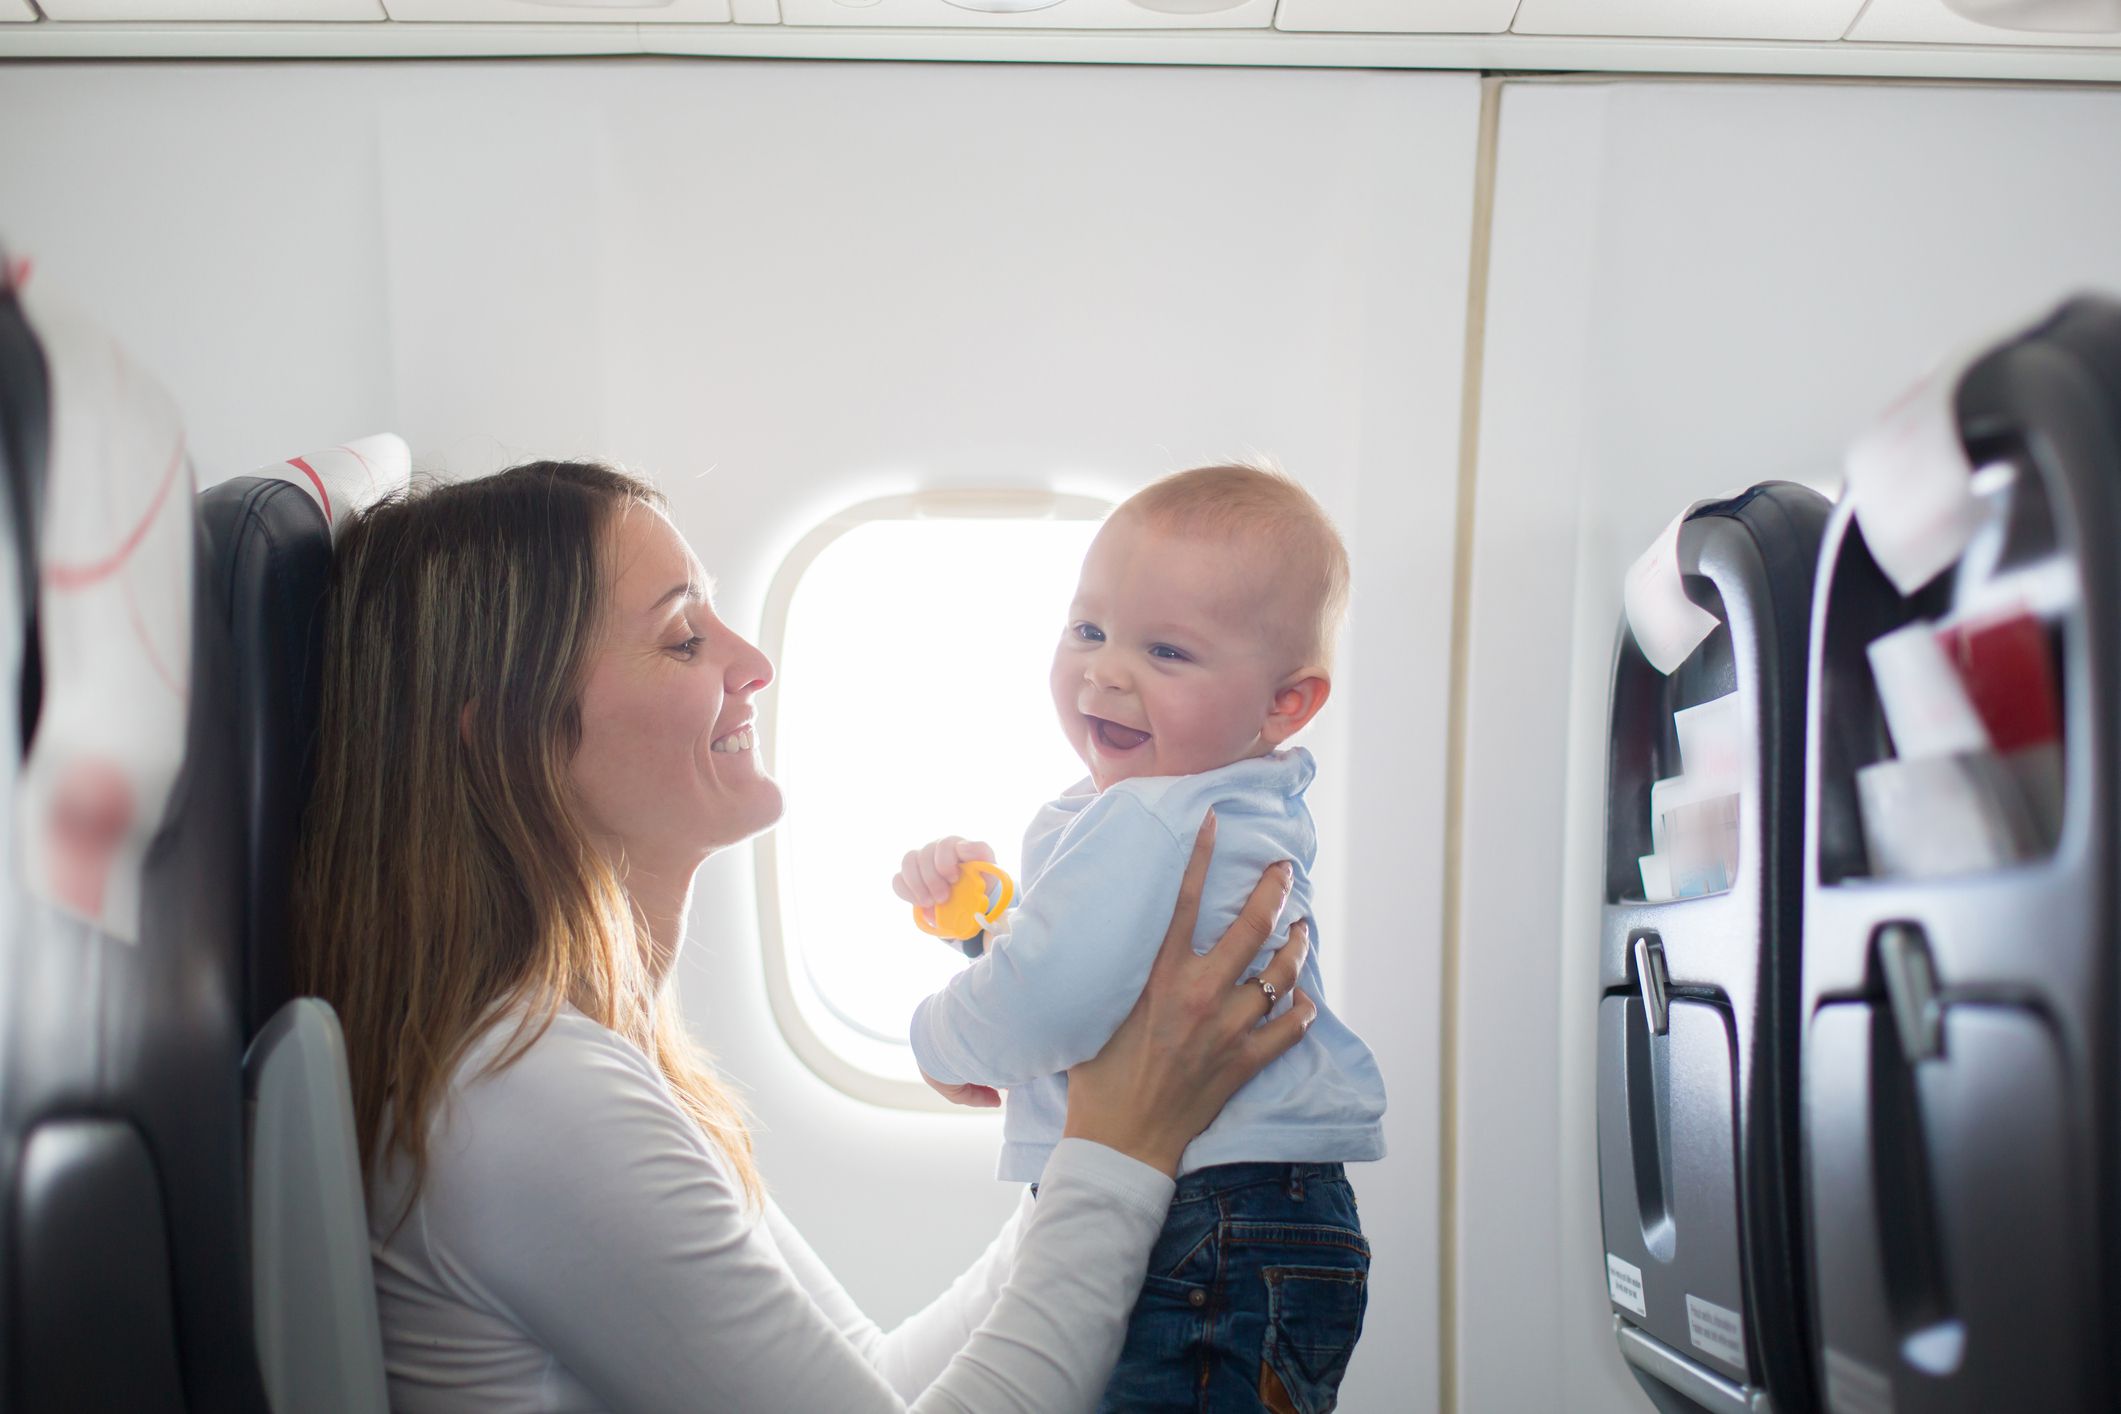 <p>The most obvious perk of traveling with a baby: You don’t need to pay for their airplane seat until they reach age two! Besides that, the upsides and downsides depend on your approach to parenting.</p><p>Generally speaking, traveling around the 6-month mark is mostly positive. Before babies start crawling, they don’t struggle to be put down or need a baby-proofed hotel room in which to roam. You can ditch the stroller and opt for a carrier as you explore, and the baby can either nap or observe the scenery.</p><p>There’s also a good chance your baby isn’t yet relying on solid food — we actually delayed kickoff by a month or two until after our travels — so there’s no need to hunt down special infant meals. If you’re breastfeeding, keep it up through your trip and you’ll barely need to pack a thing for your baby. Otherwise, just bring enough formula (yes, TSA will allow it through) and you’ll be good to go.</p><p>With infants younger than 6 months, you may face more fussiness. And depending on the conditions your little one needs to get to sleep, your schedule may have to revolve around nap times. After they’ve started to crawl or toddle, you’ll want to be more vigilant of potential hazards in your hotel, rental, or host’s home.</p><p>When planning your day, keep in mind that picky eaters can take time to satisfy. But what better way to expand your kid’s palate than in another country? Our daughter tried her first taste of pancakes in Amsterdam, while sitting in her first-ever high chair, and it remains one of our favorite early-parenting memories.</p><p>By the way, we also have good tips for new parents wondering <a href="https://www.sofi.com/learn/content/how-families-afford-to-travel/">how families afford to travel</a>.</p>